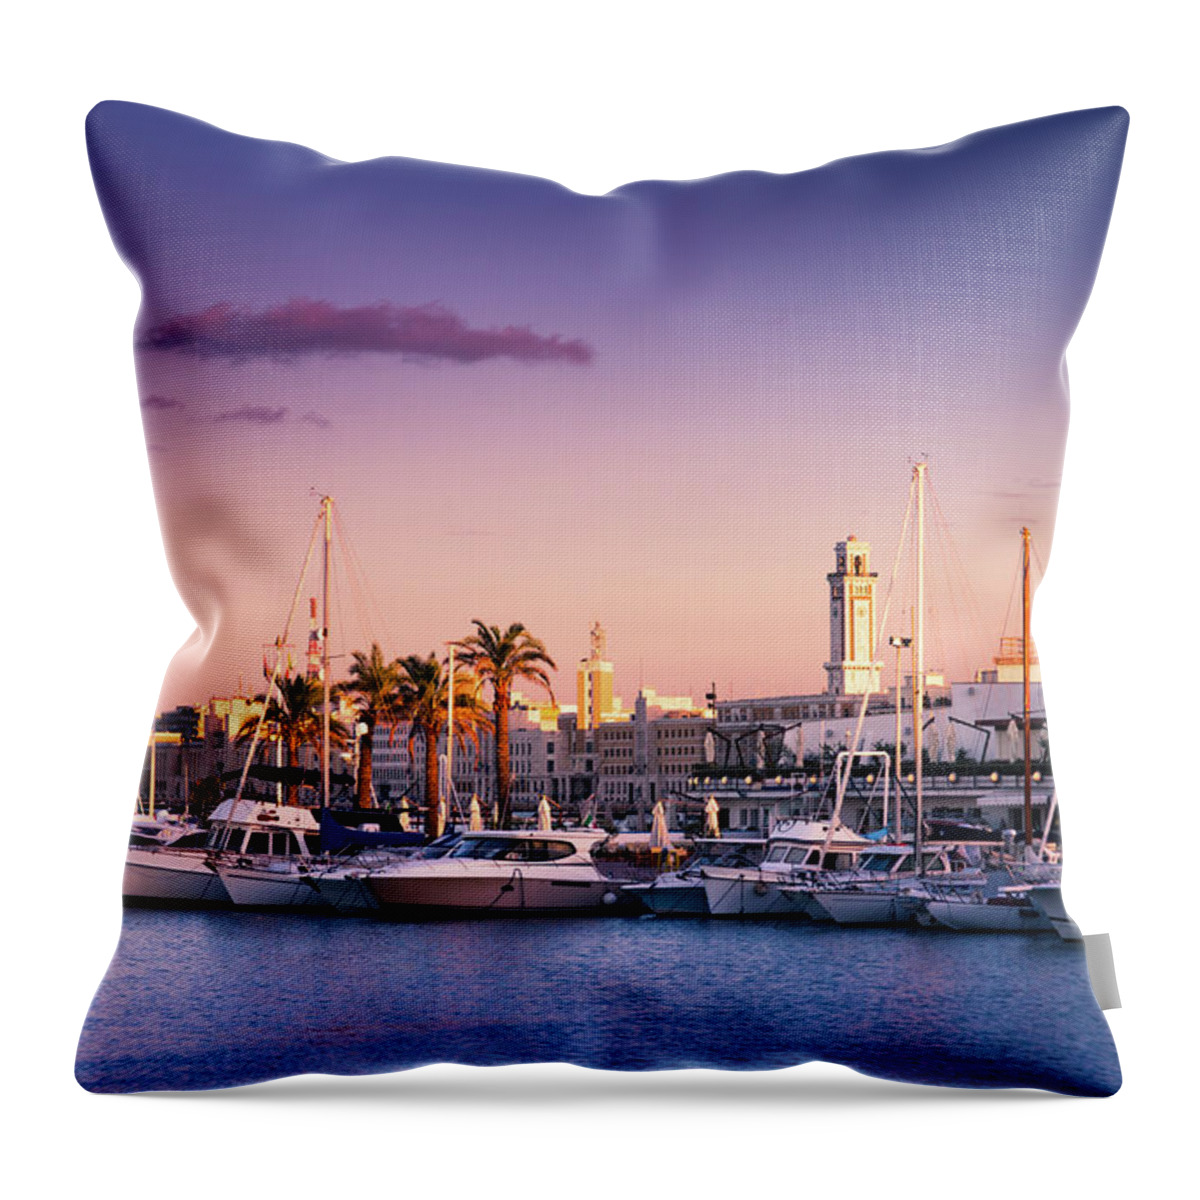 Tranquility Throw Pillow featuring the photograph Bari, Italy by Marko Cvejic